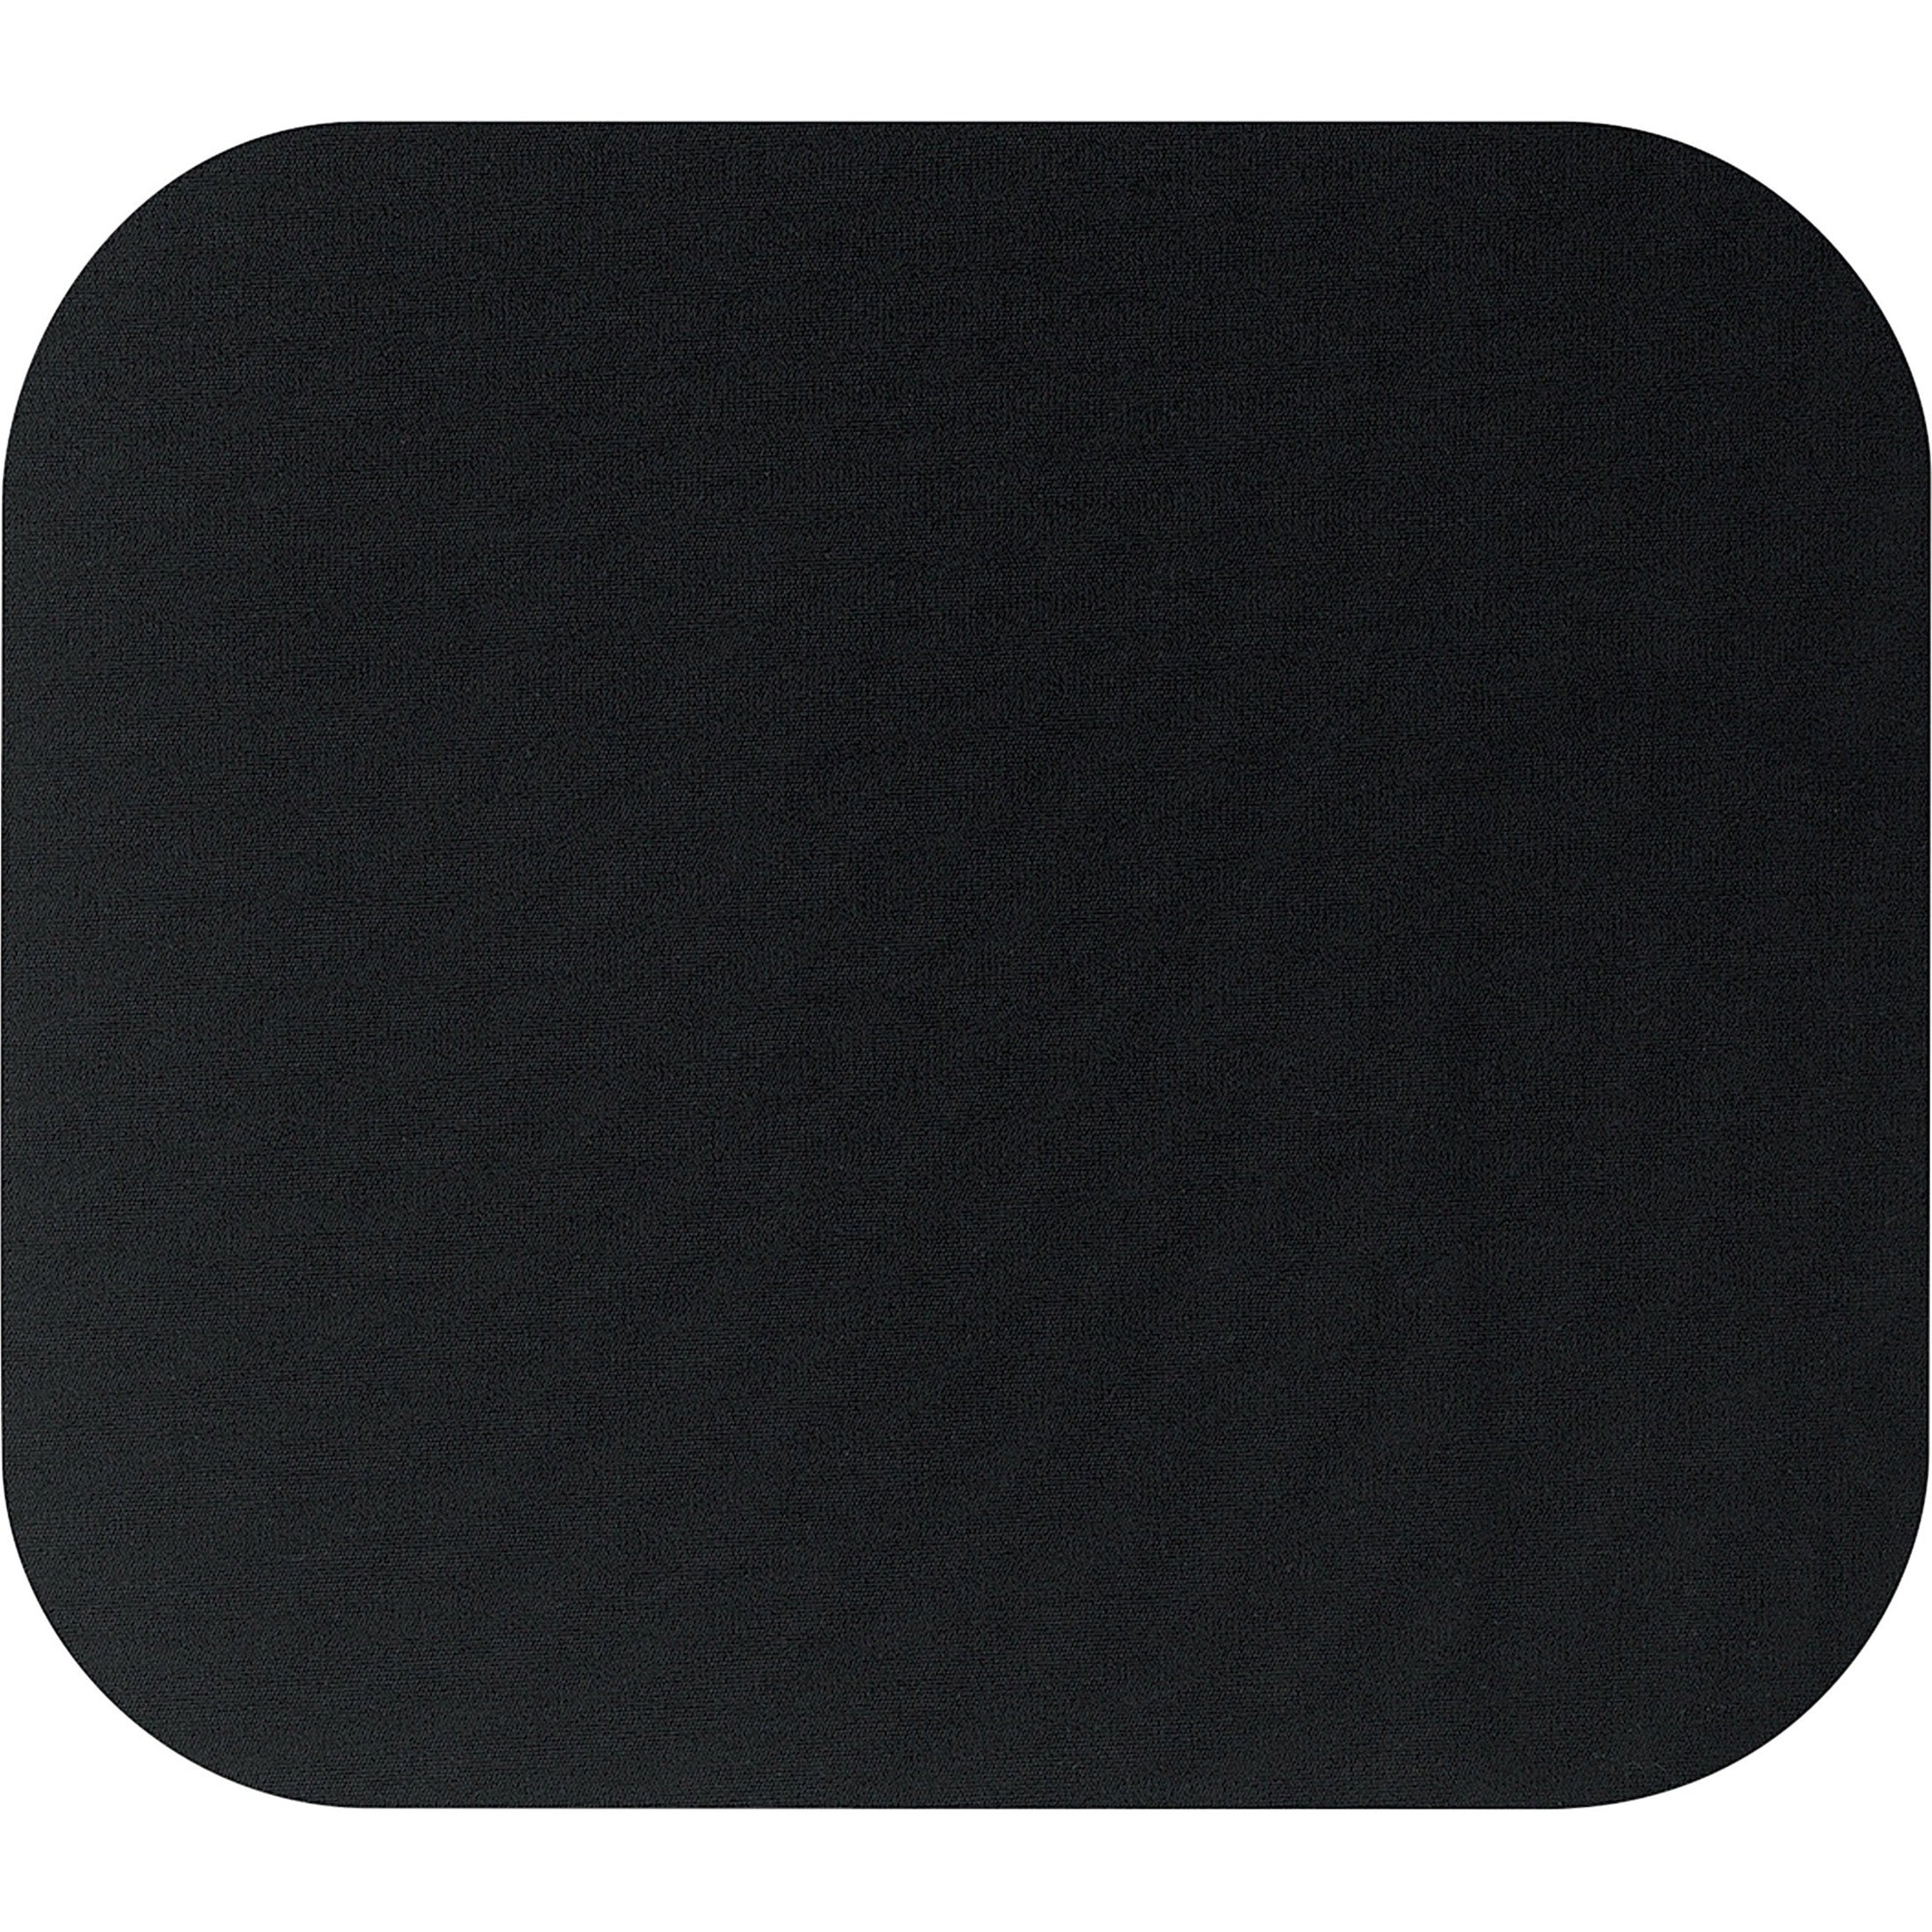 Fellowes 58024 Mouse Pad, Durable Non-skid, Scratch Resistant, Black